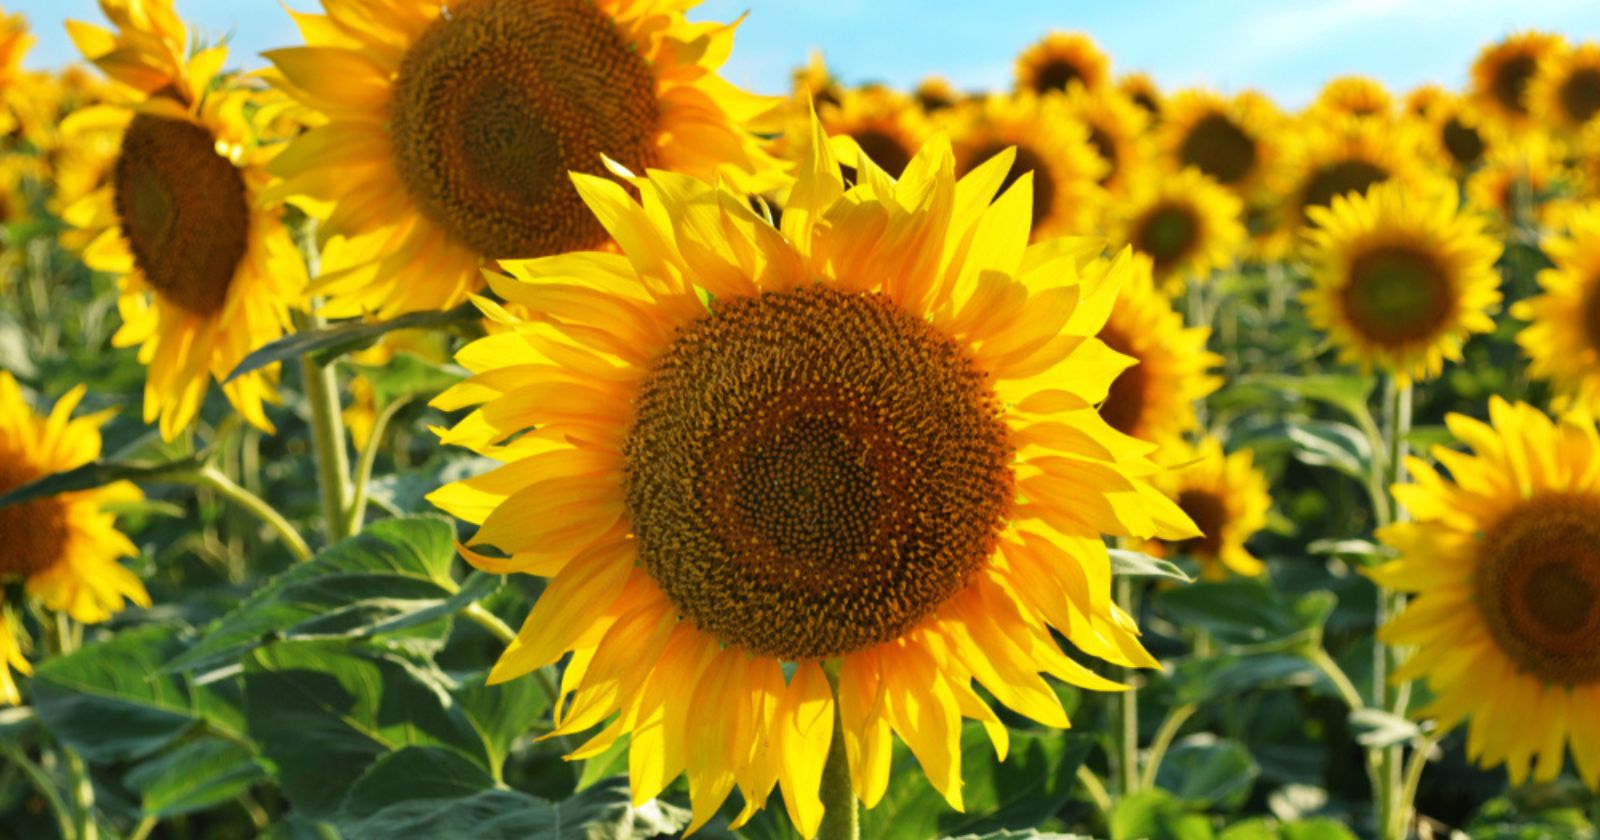 How do you get beautiful sunflowers from simple seeds in the garden or on your balcony?